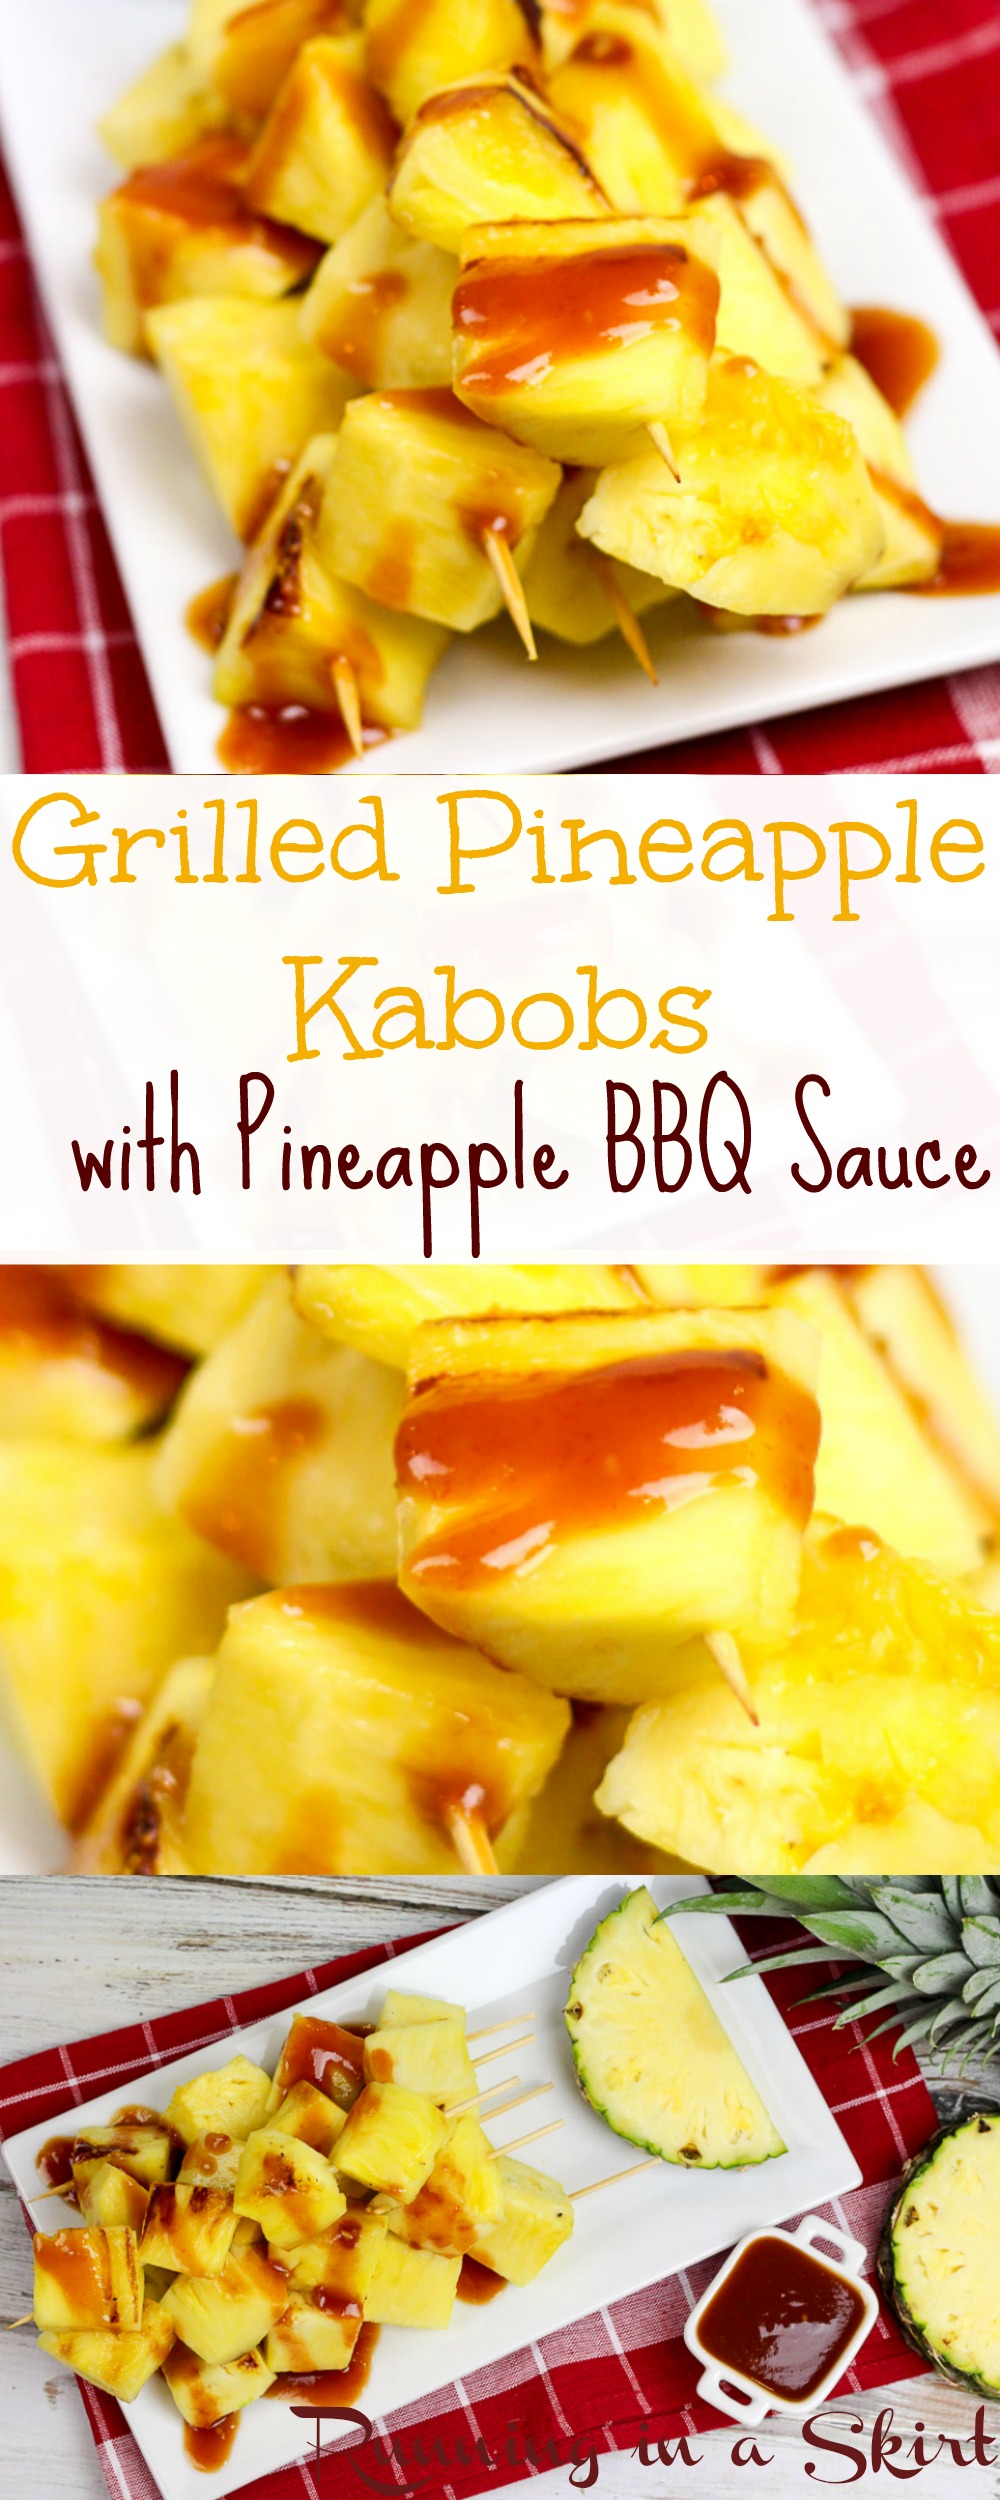 Grilled Pineapple Kabobs Pineapple BBQ Sauce Recipe